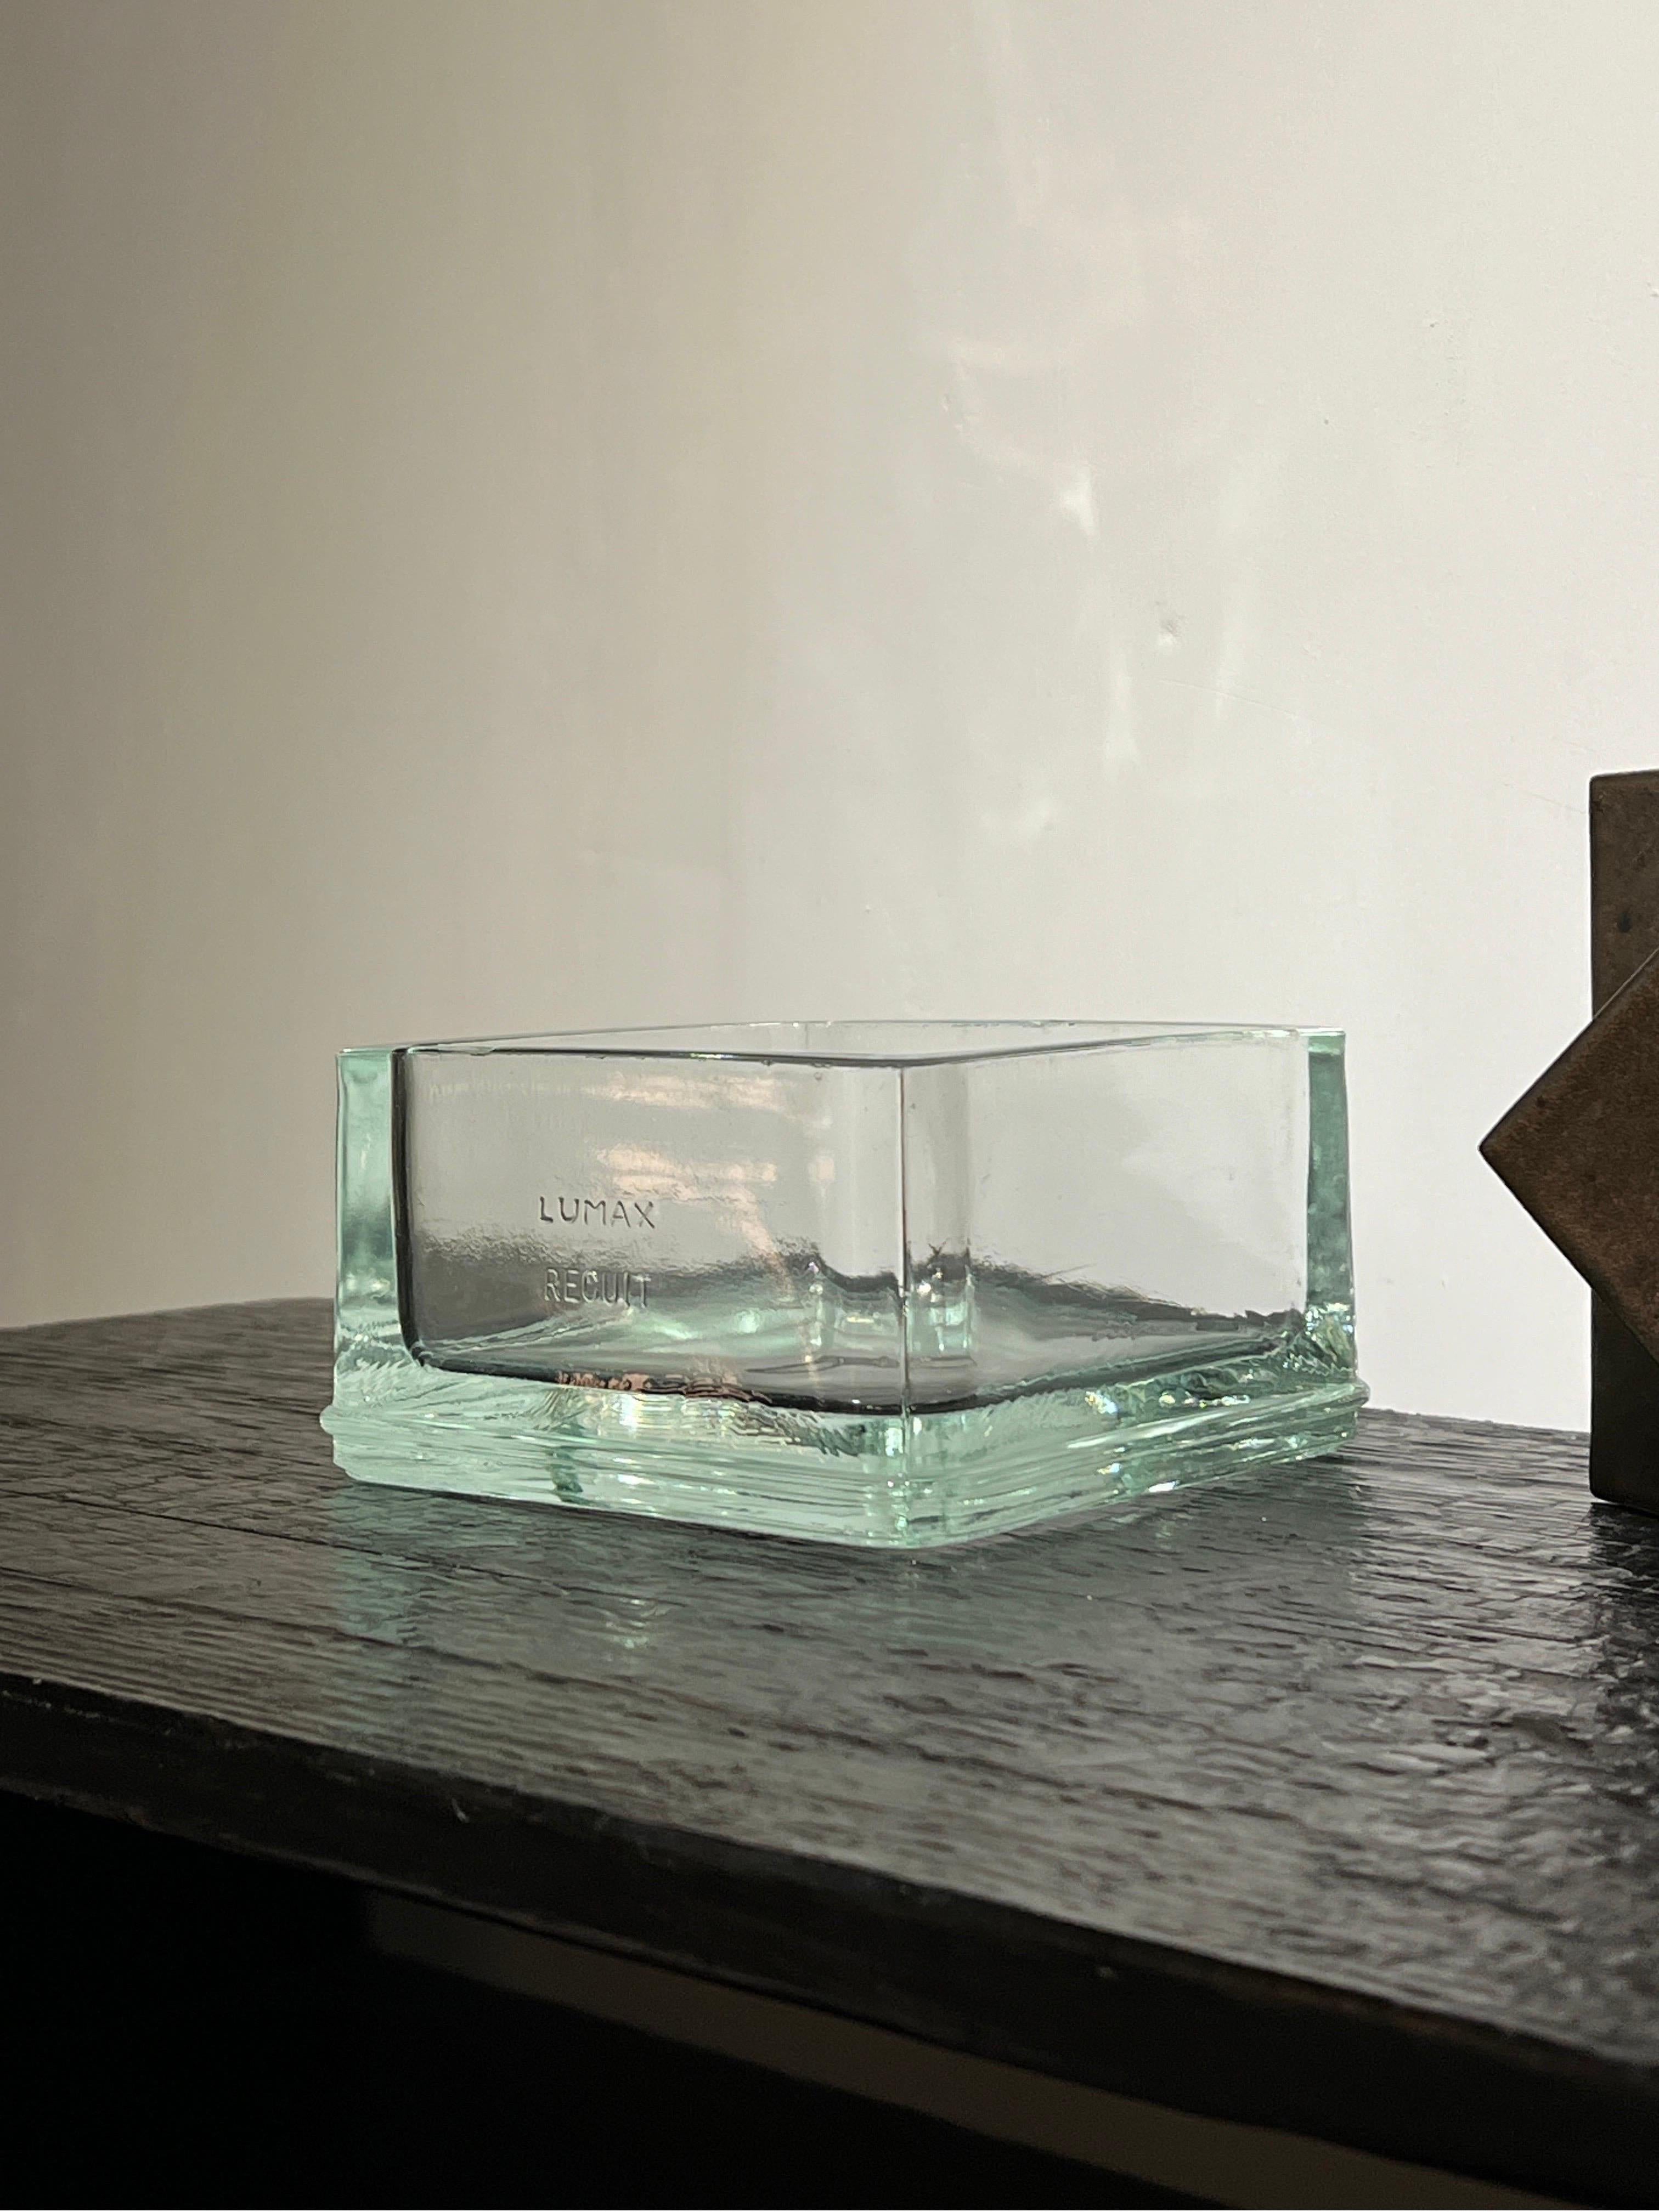 Rare authentic and iconic modern glass storage compartment or ashtray designed by the famous French architects of the 20th century Le Corbusier and Charlotte Perriand for Lumax. 

Le Corbusier and Charlotte Perriand, pioneering figures in modern and